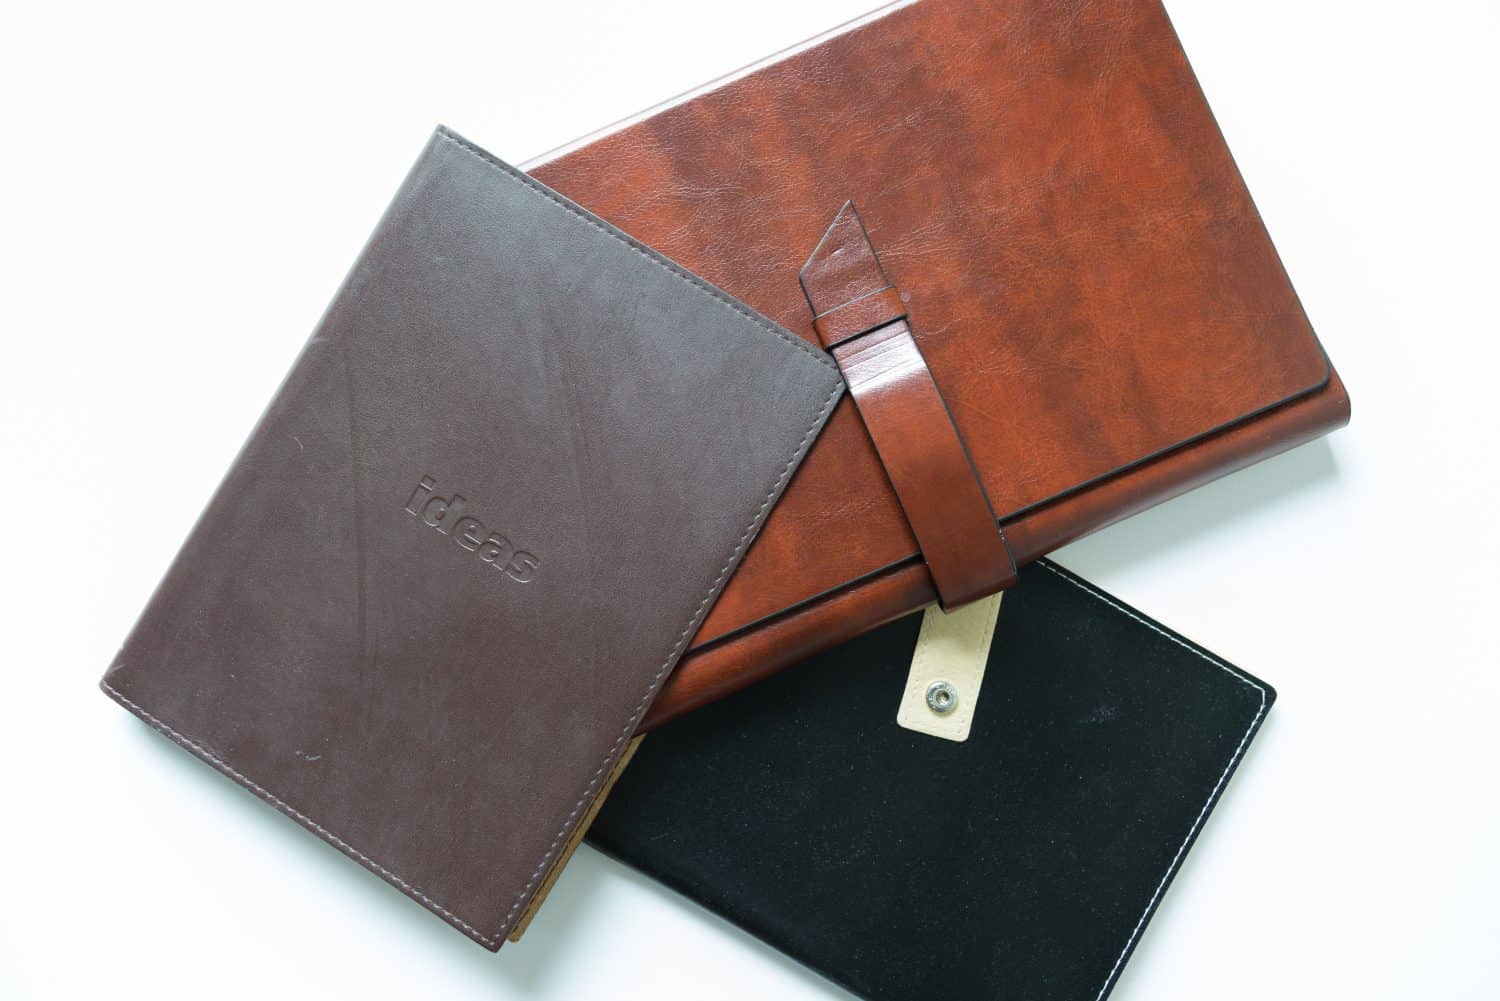 three book or journal slip case made of vinyl or bonded leather on white